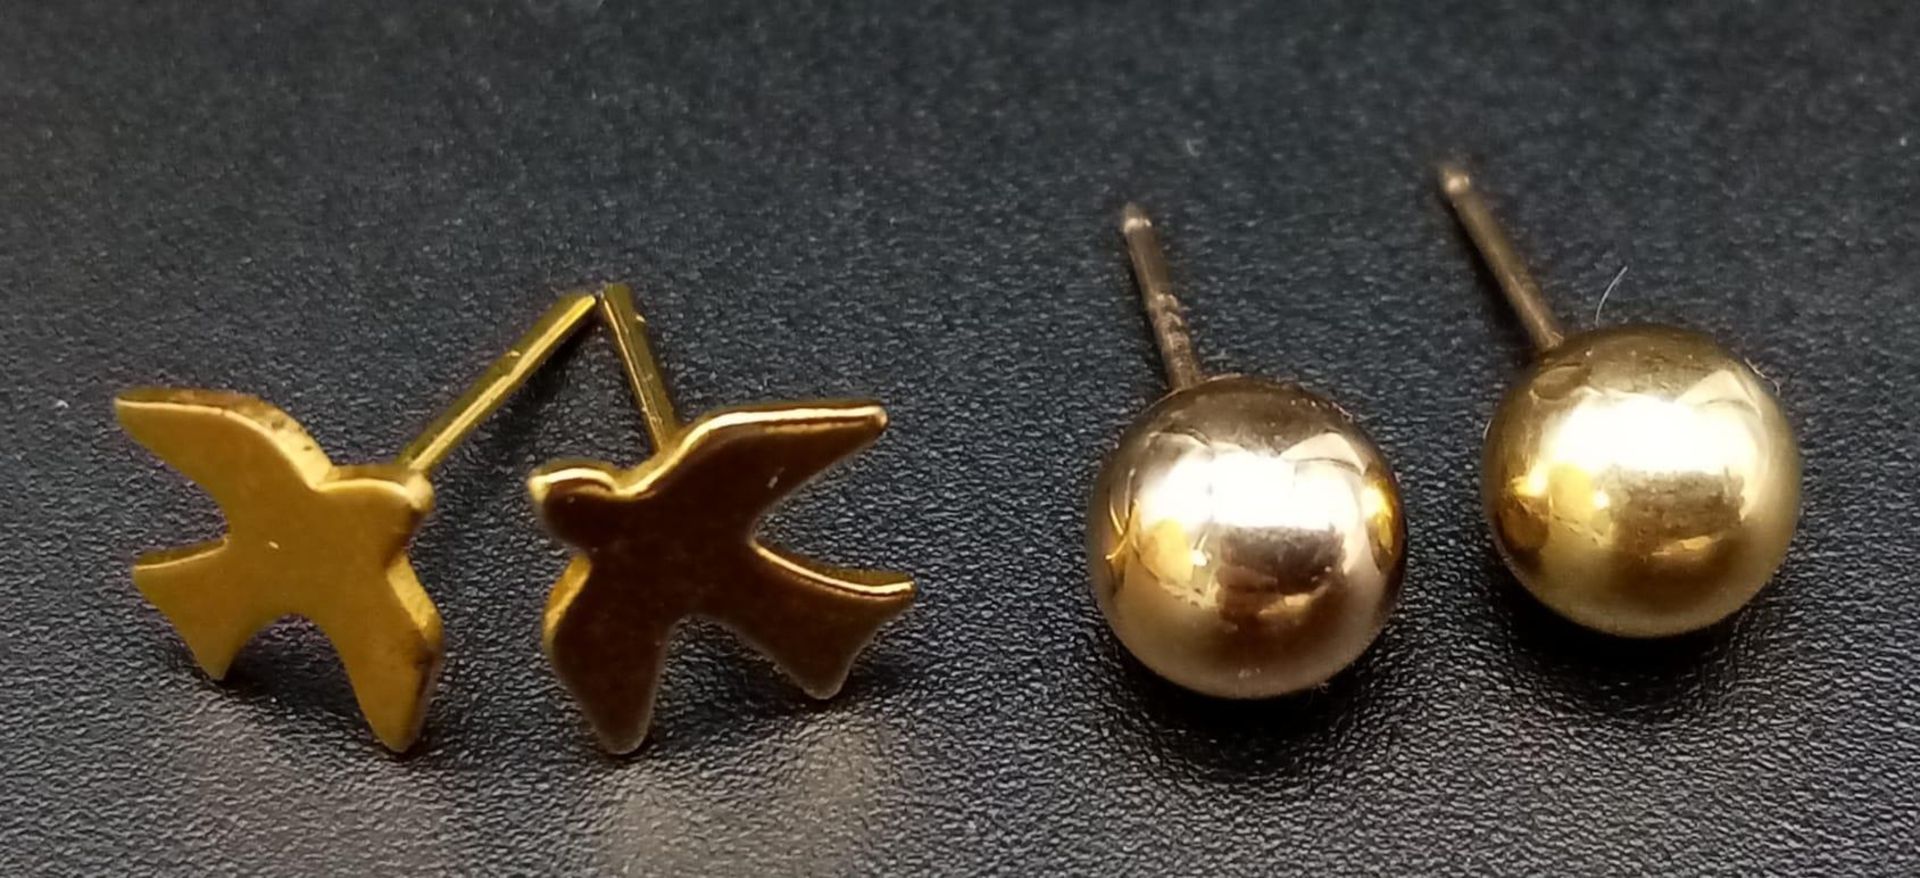 Two Pairs of 9K Yellow Gold Earrings - Starlings and Balls. 0.6g (no butterflies).